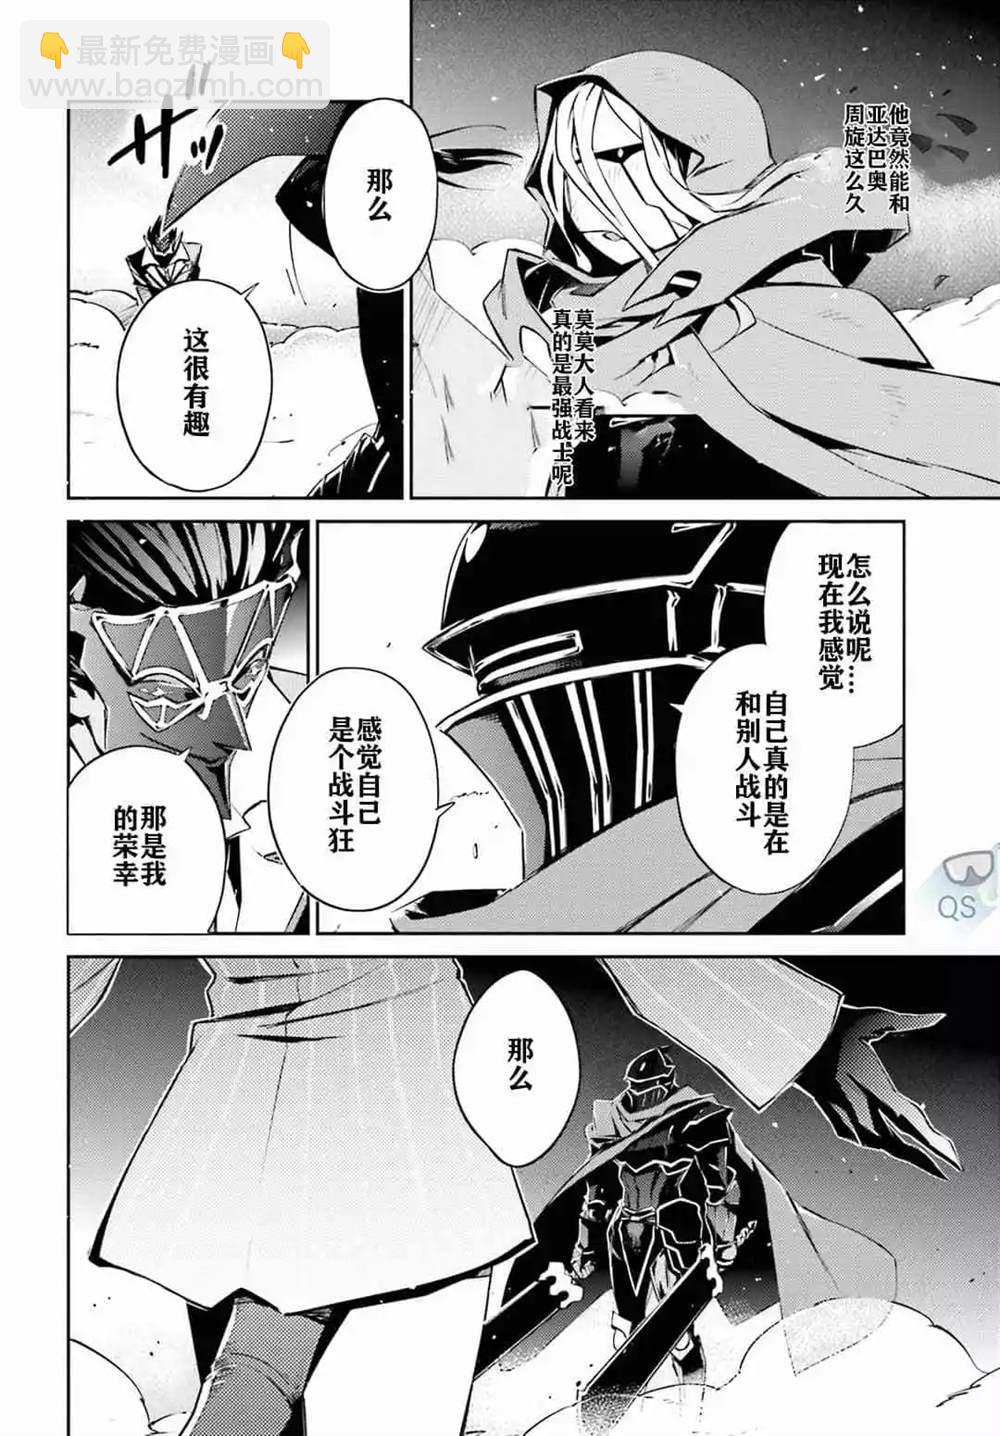 OVERLORD - 第52話 - 2